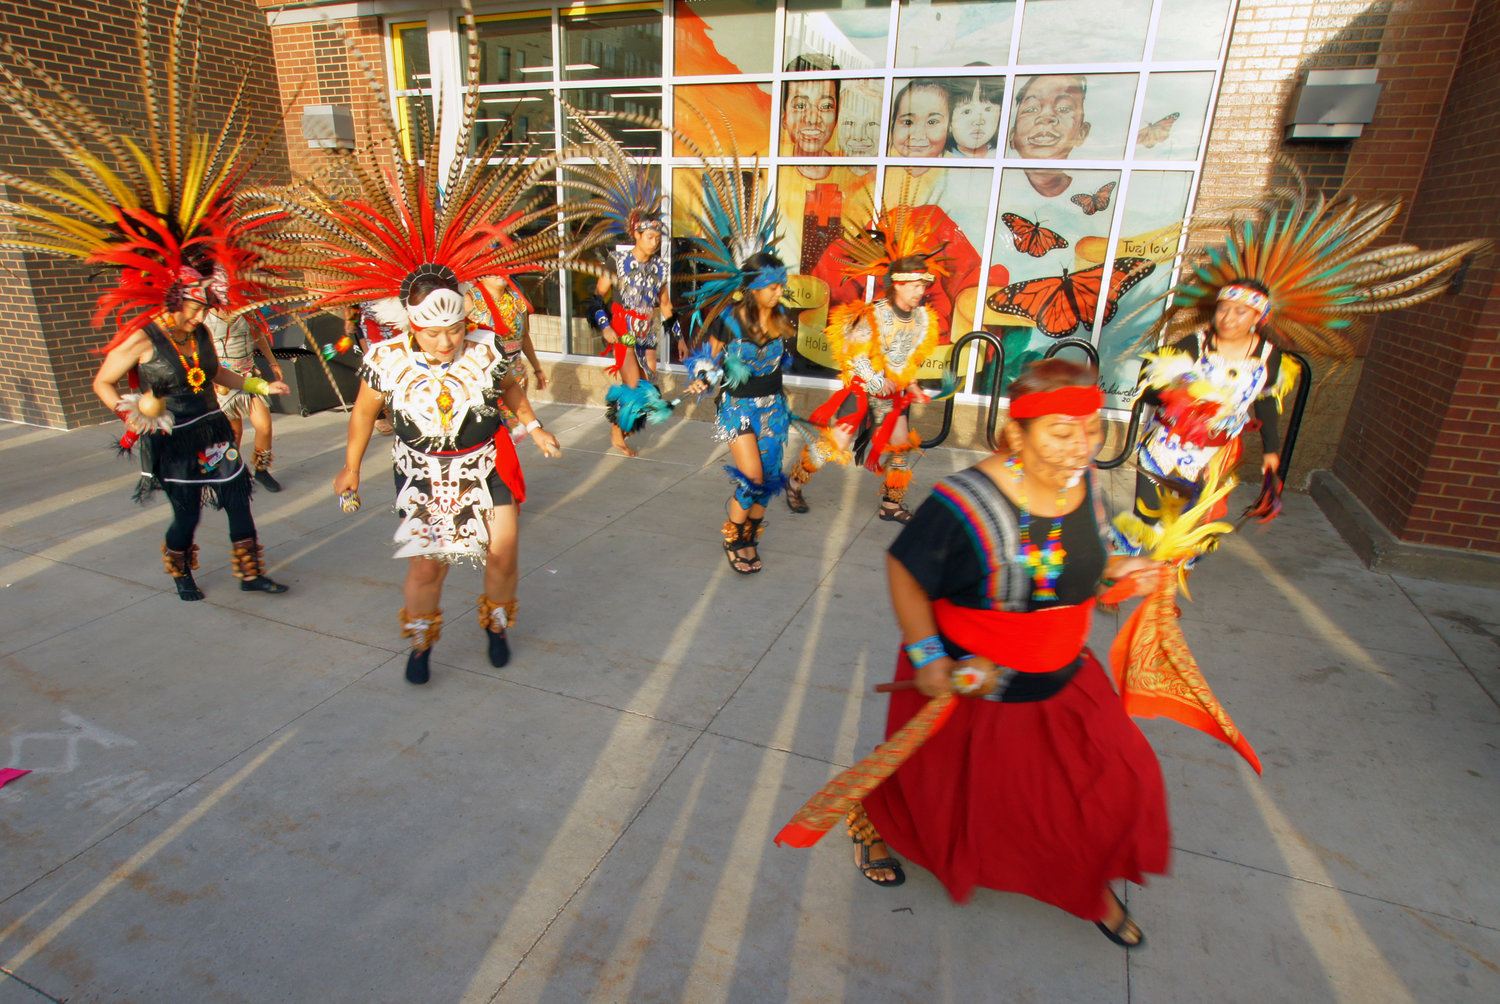 Kalpulli Ketzal Coatlicue Dance Troupe performs during a mural unveiling at Wells Fargo (2919 27th Ave. S.) on Sept. 22, 2022. Artist Charles Caldwell, a lifelong Minneapolis resident, set the mural against the city skyline. It celebrates the cultural diversity of south Minneapolis and includes symbols of peace (dove), hope (children), and transformation (butterfly). A yellow ribbon offers a greeting in six languages: Ojibwe, English, Spanish, Somali, Chinese, and Hmong. (Photo by Terry Faust)